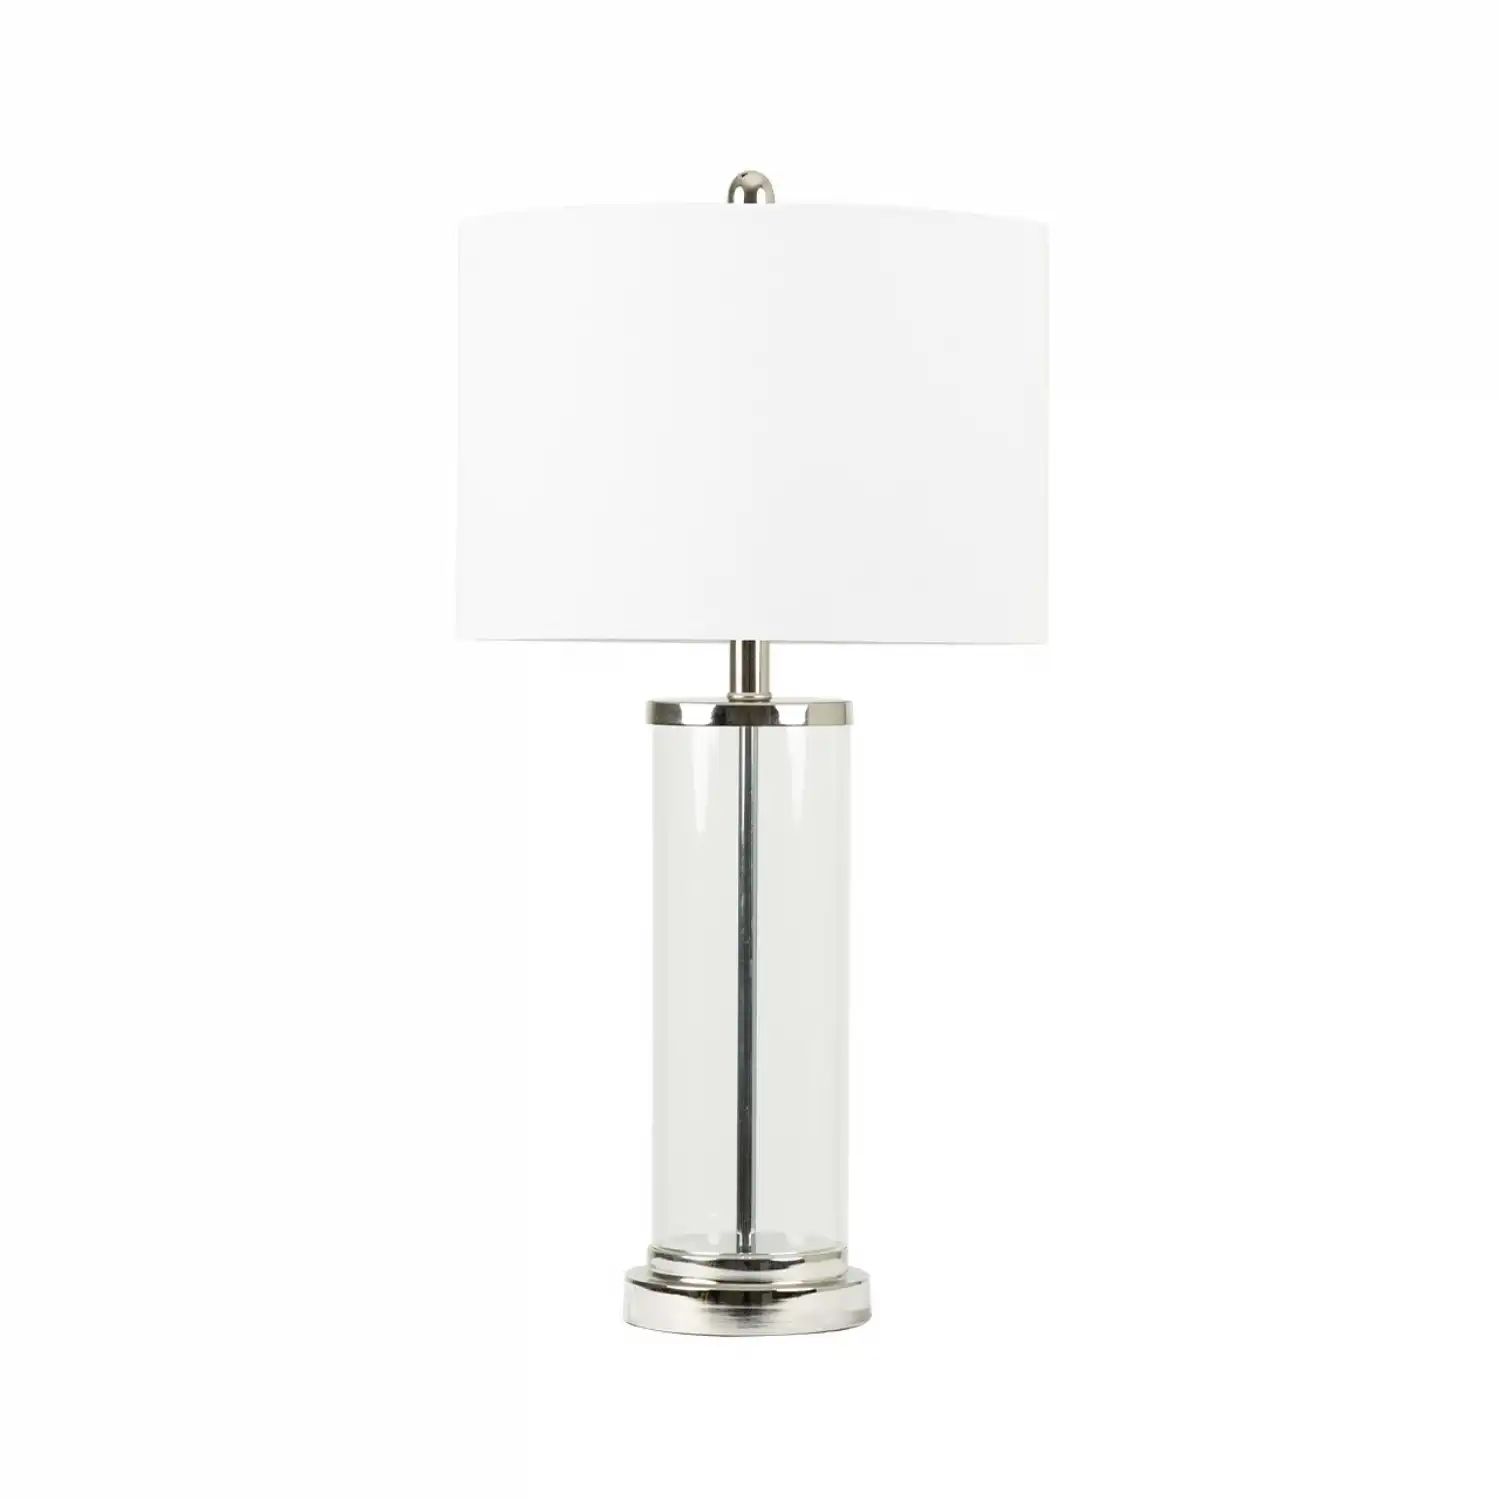 66. 7cm Clear Glass Table Lamp White Linen Shade